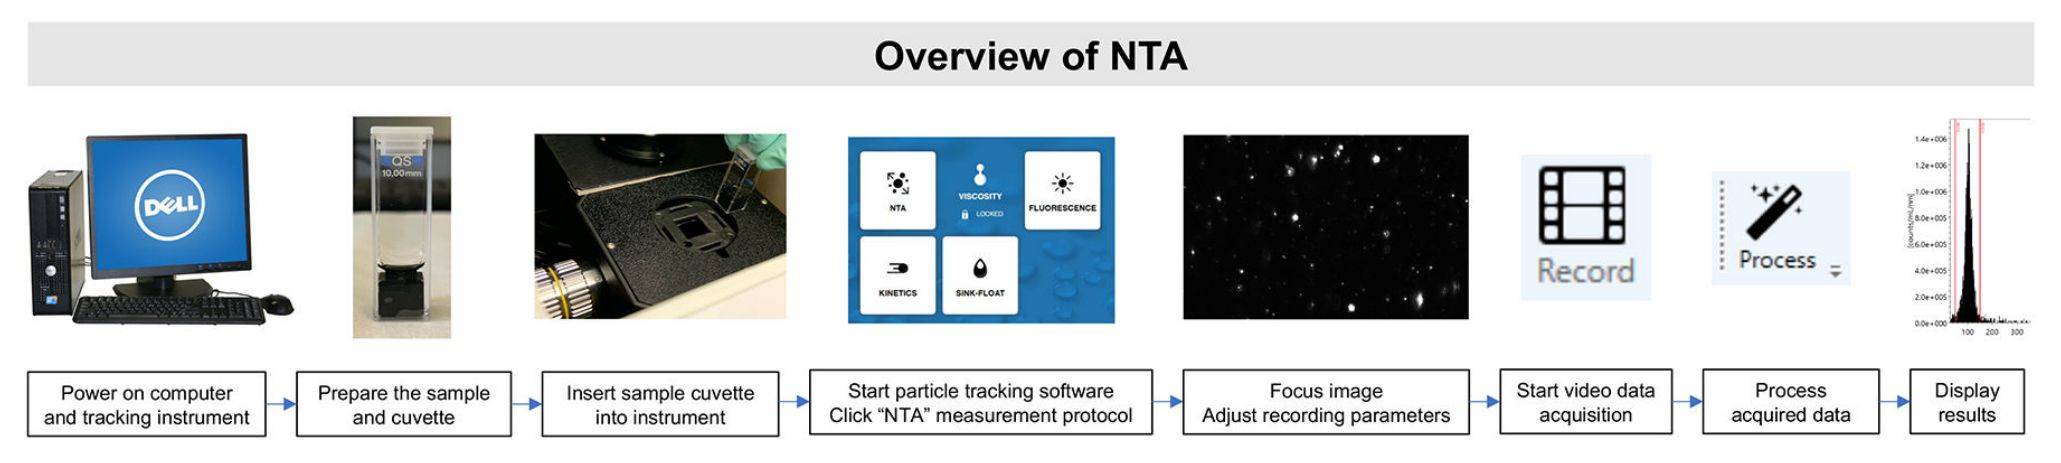 Figure 1. Overview of the NTA.